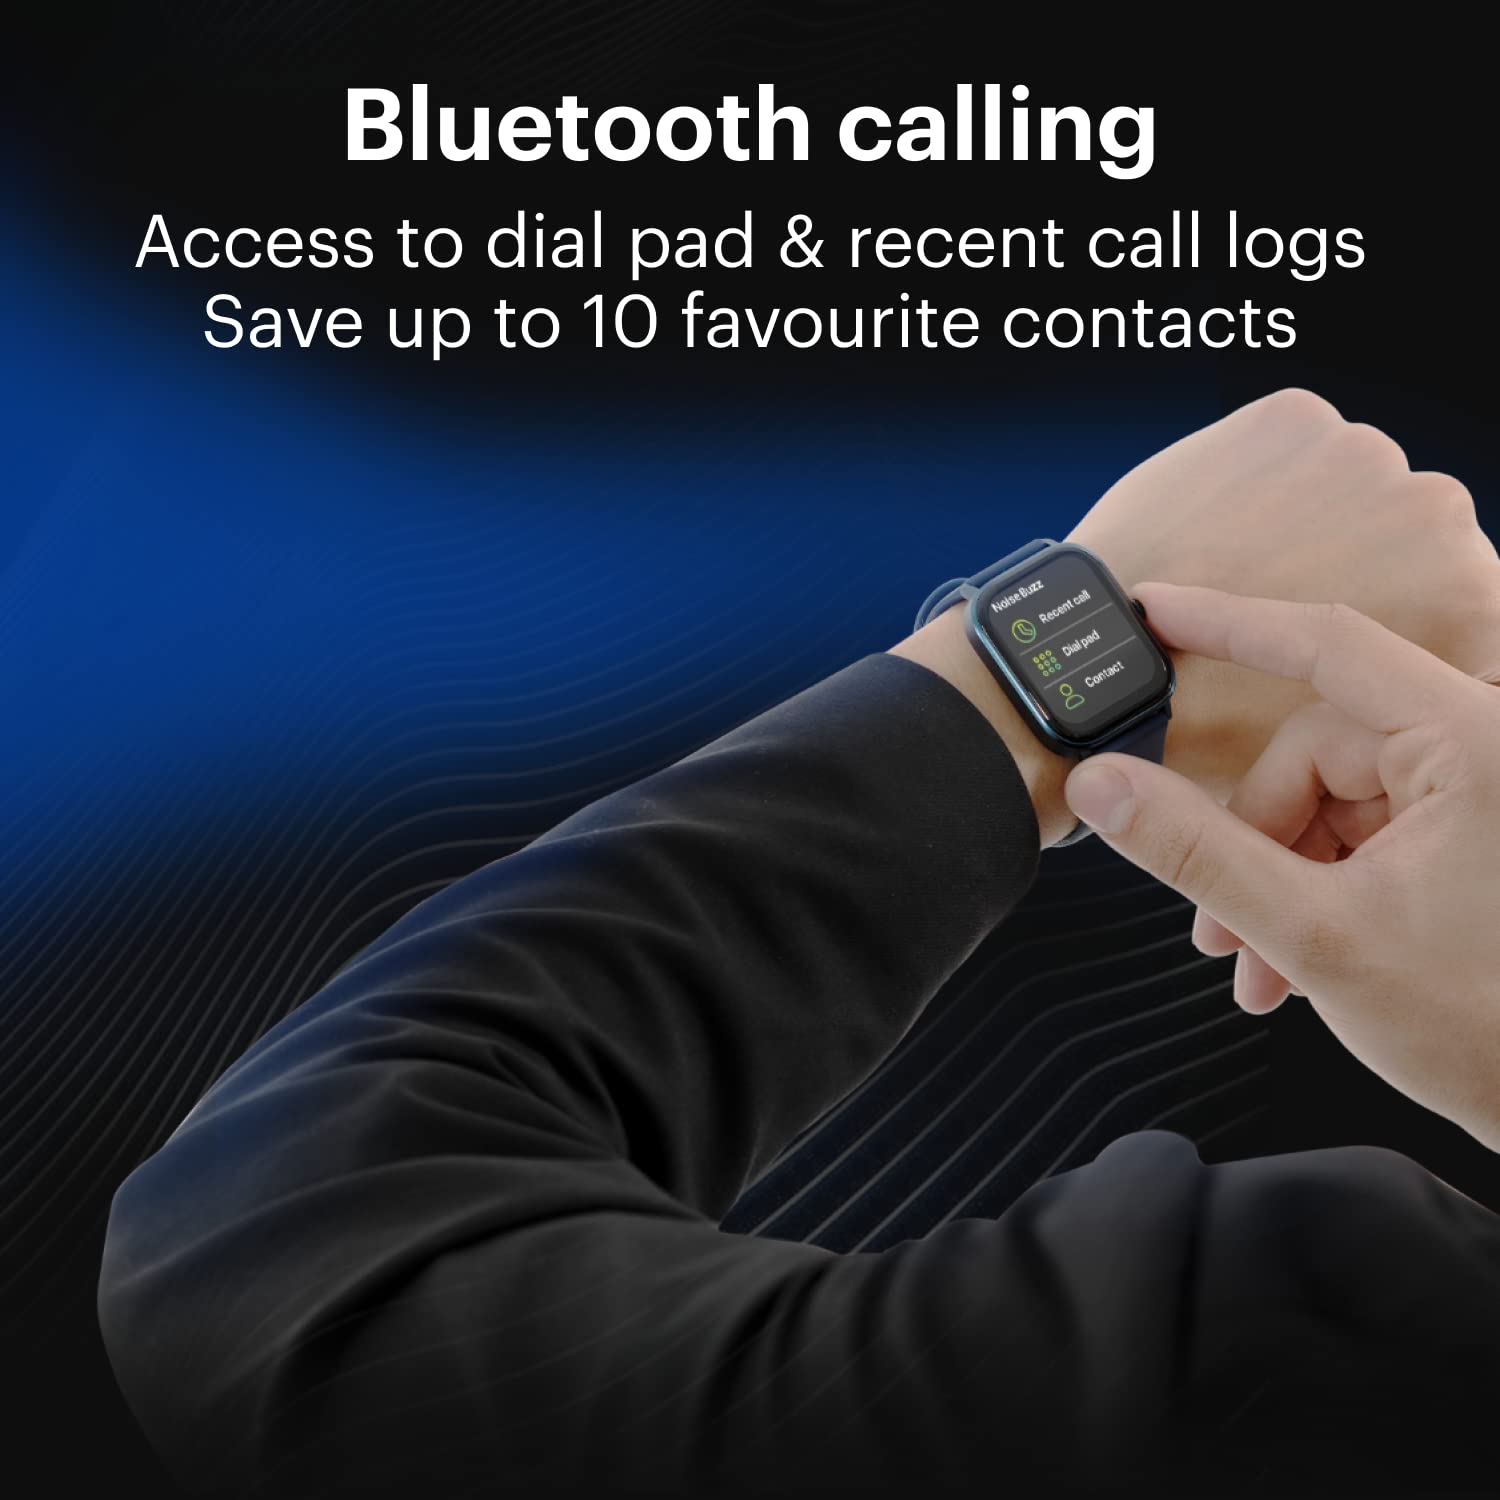 Noise Newly Launched Quad Call 1.81" Display, Bluetooth Calling Smart Watch, AI Voice Assistance, 160+Hrs Battery Life, Metallic Build, in-Built Games, 100 Sports Modes, 100+ Watch Faces (Deep Wine) - Blossom Mantra